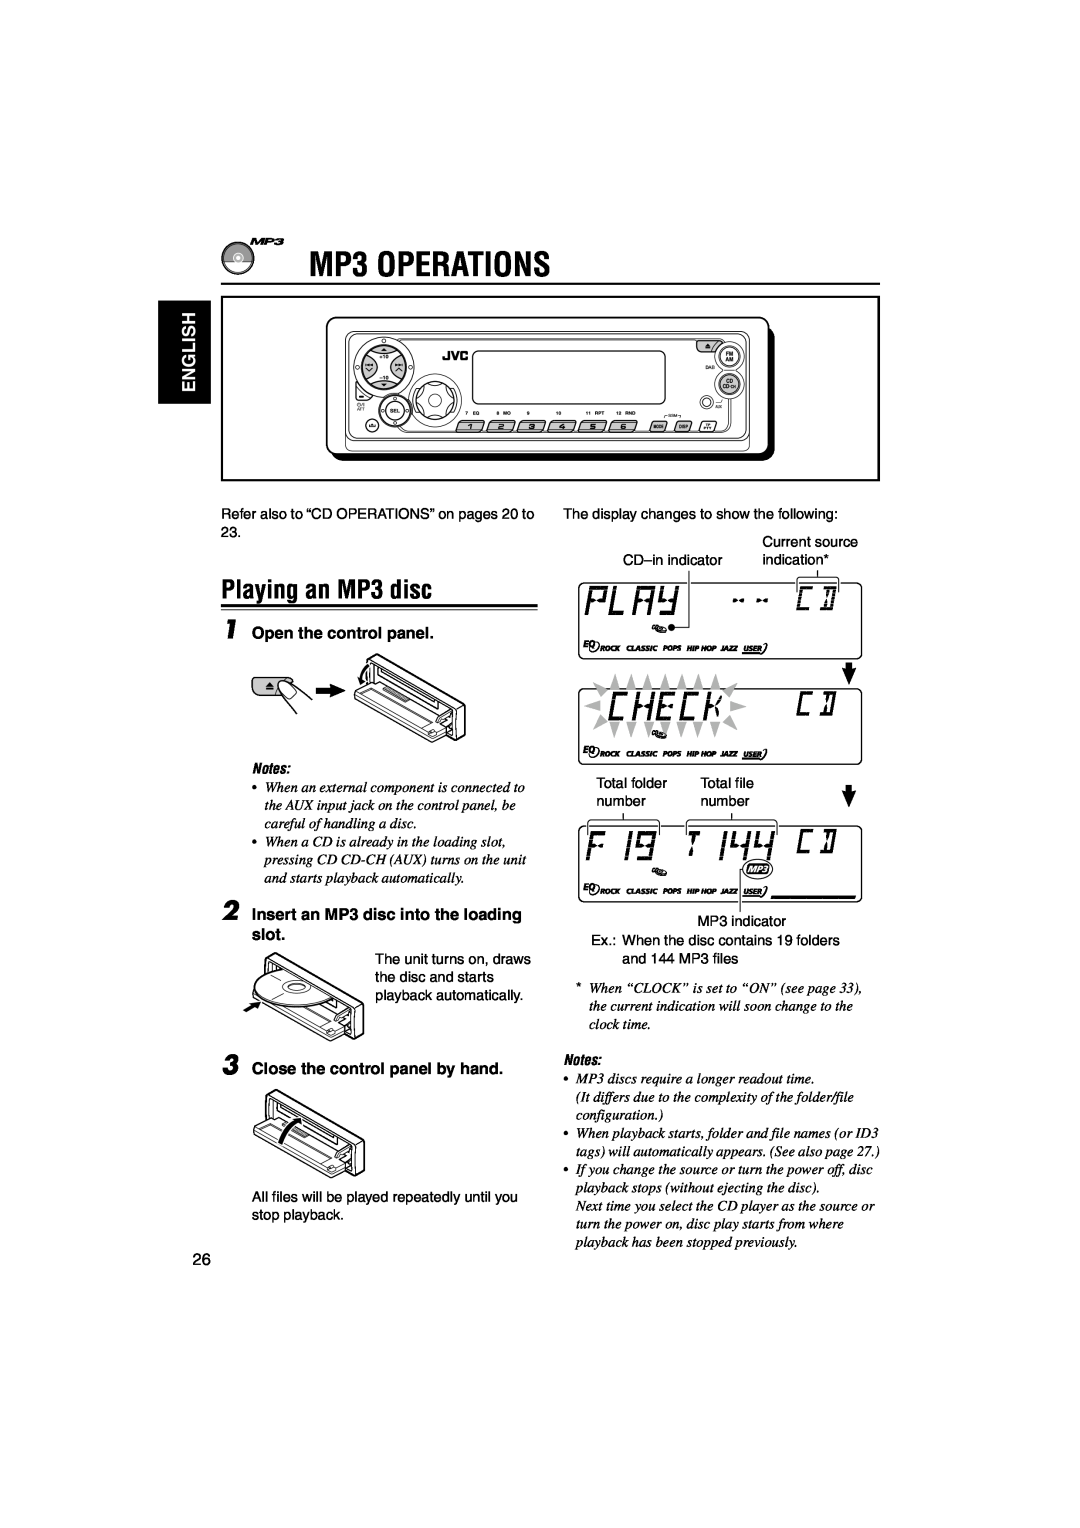 JVC GET0126-001A manual MP3 OPERATIONS, Playing an MP3 disc, Insert an MP3 disc into the loading slot, English 